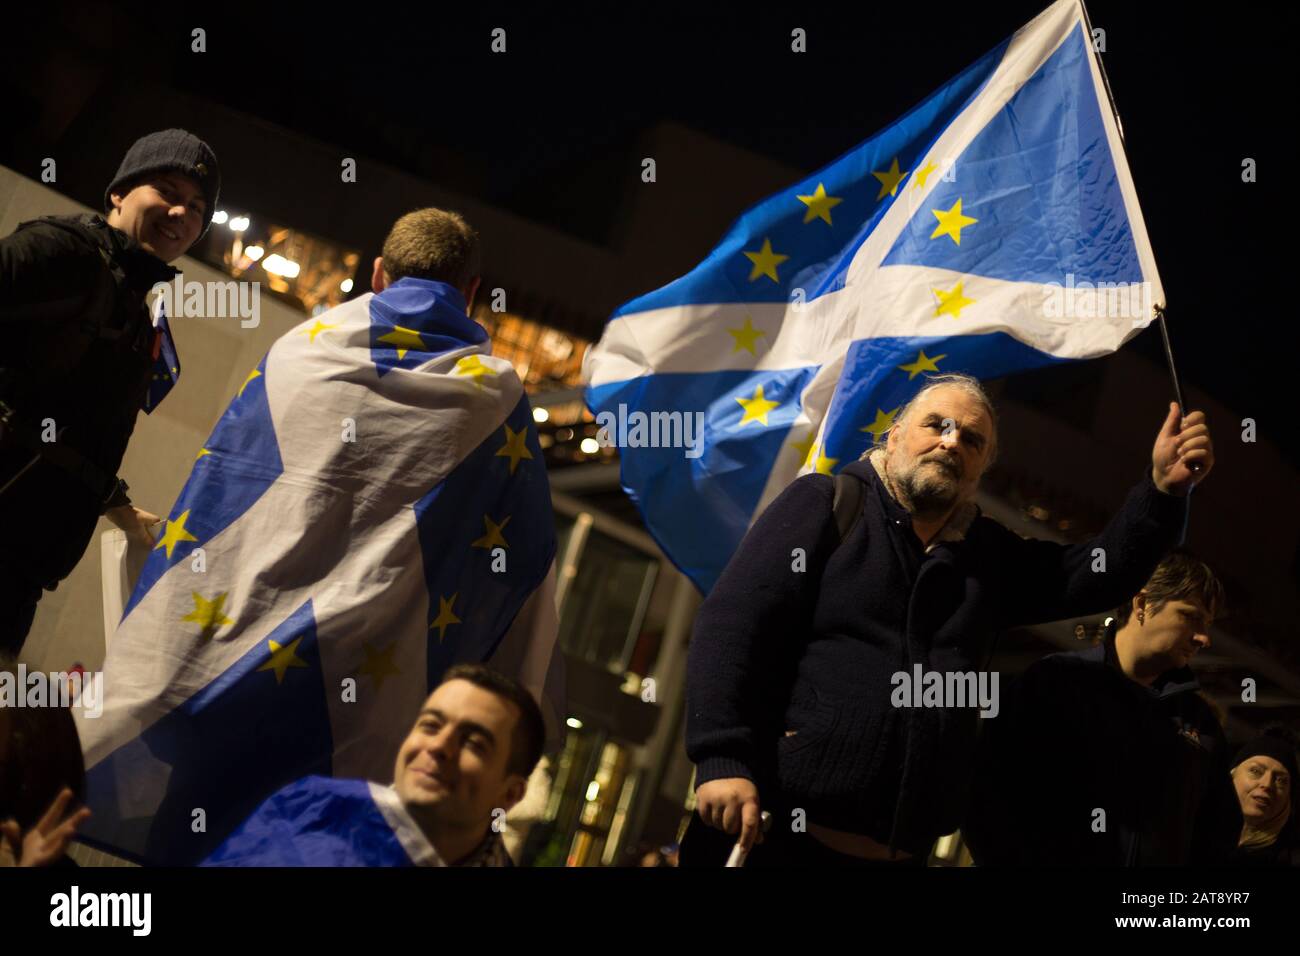 Edinburgh, UK. 31st Jan, 2020. 'Missing EU Already' Brexit Day Protest rally, outside the Scottish Parliament building on the evening that the United Kingdom leaves the European Union. Credit: jeremy sutton-hibbert/Alamy Live News Stock Photo